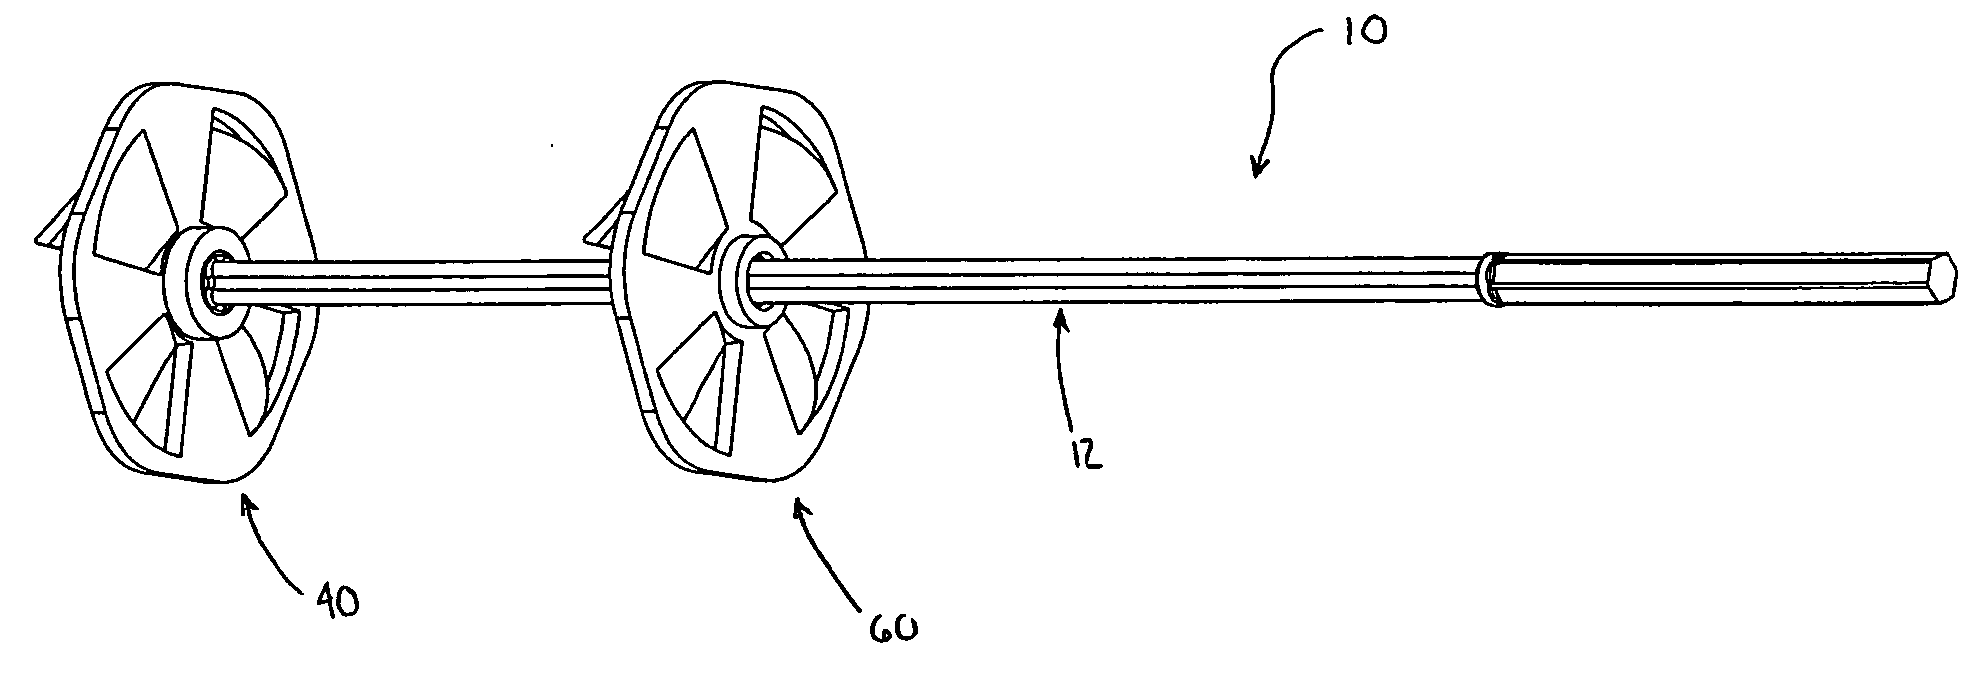 Rotary mixing device